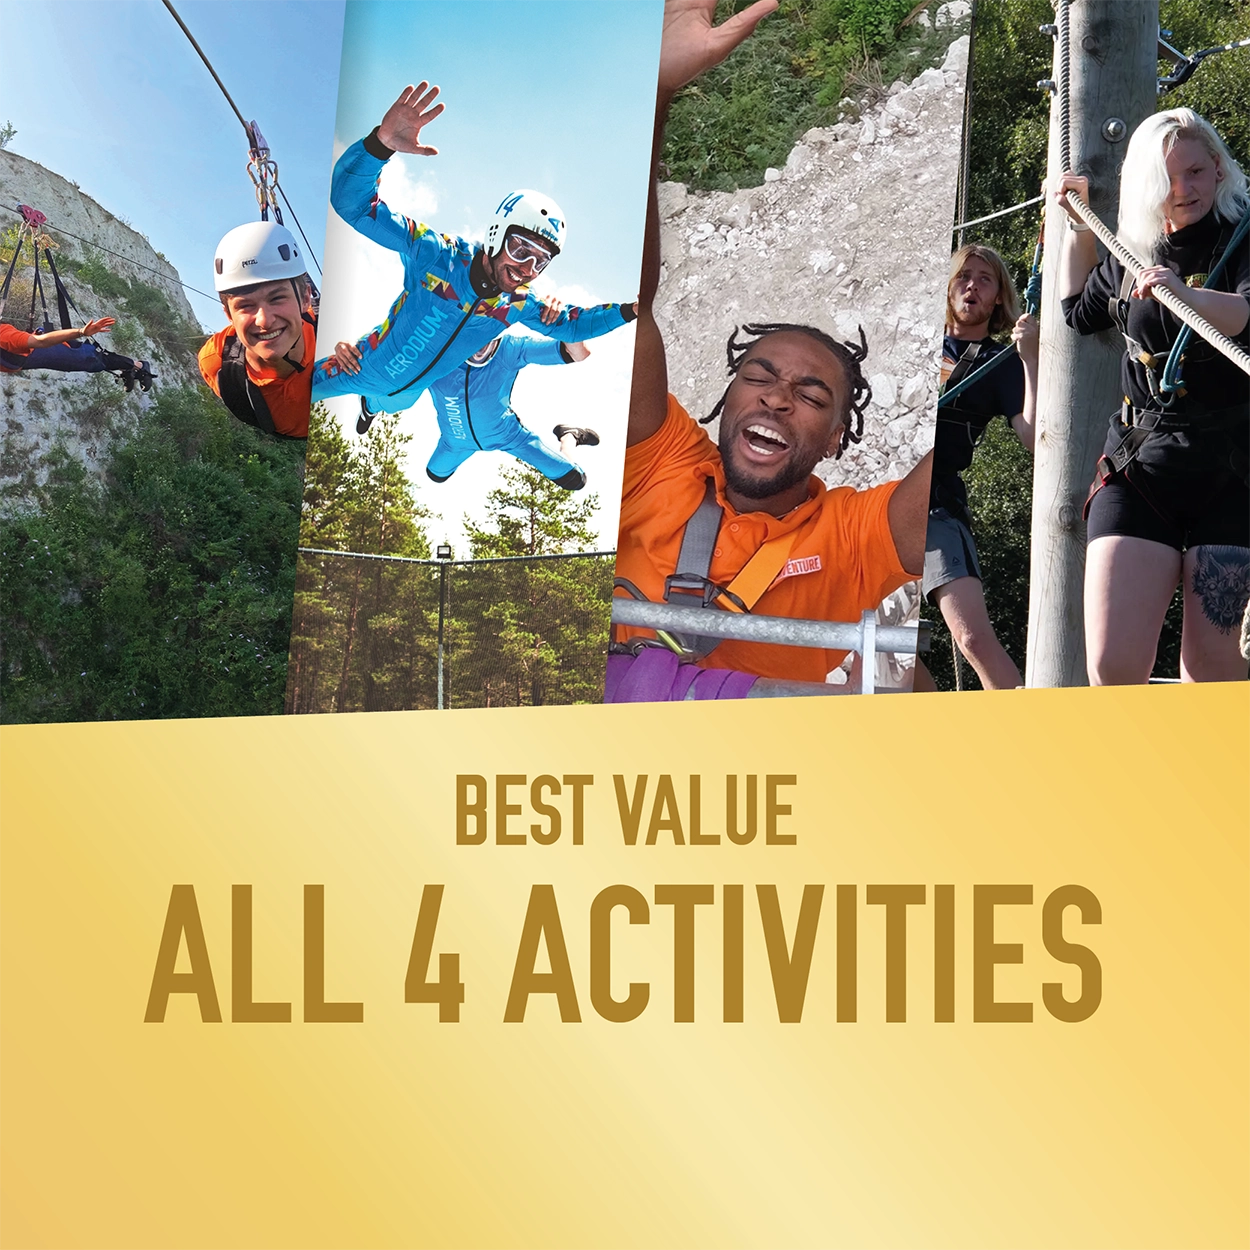 All 4 activities within the activity package